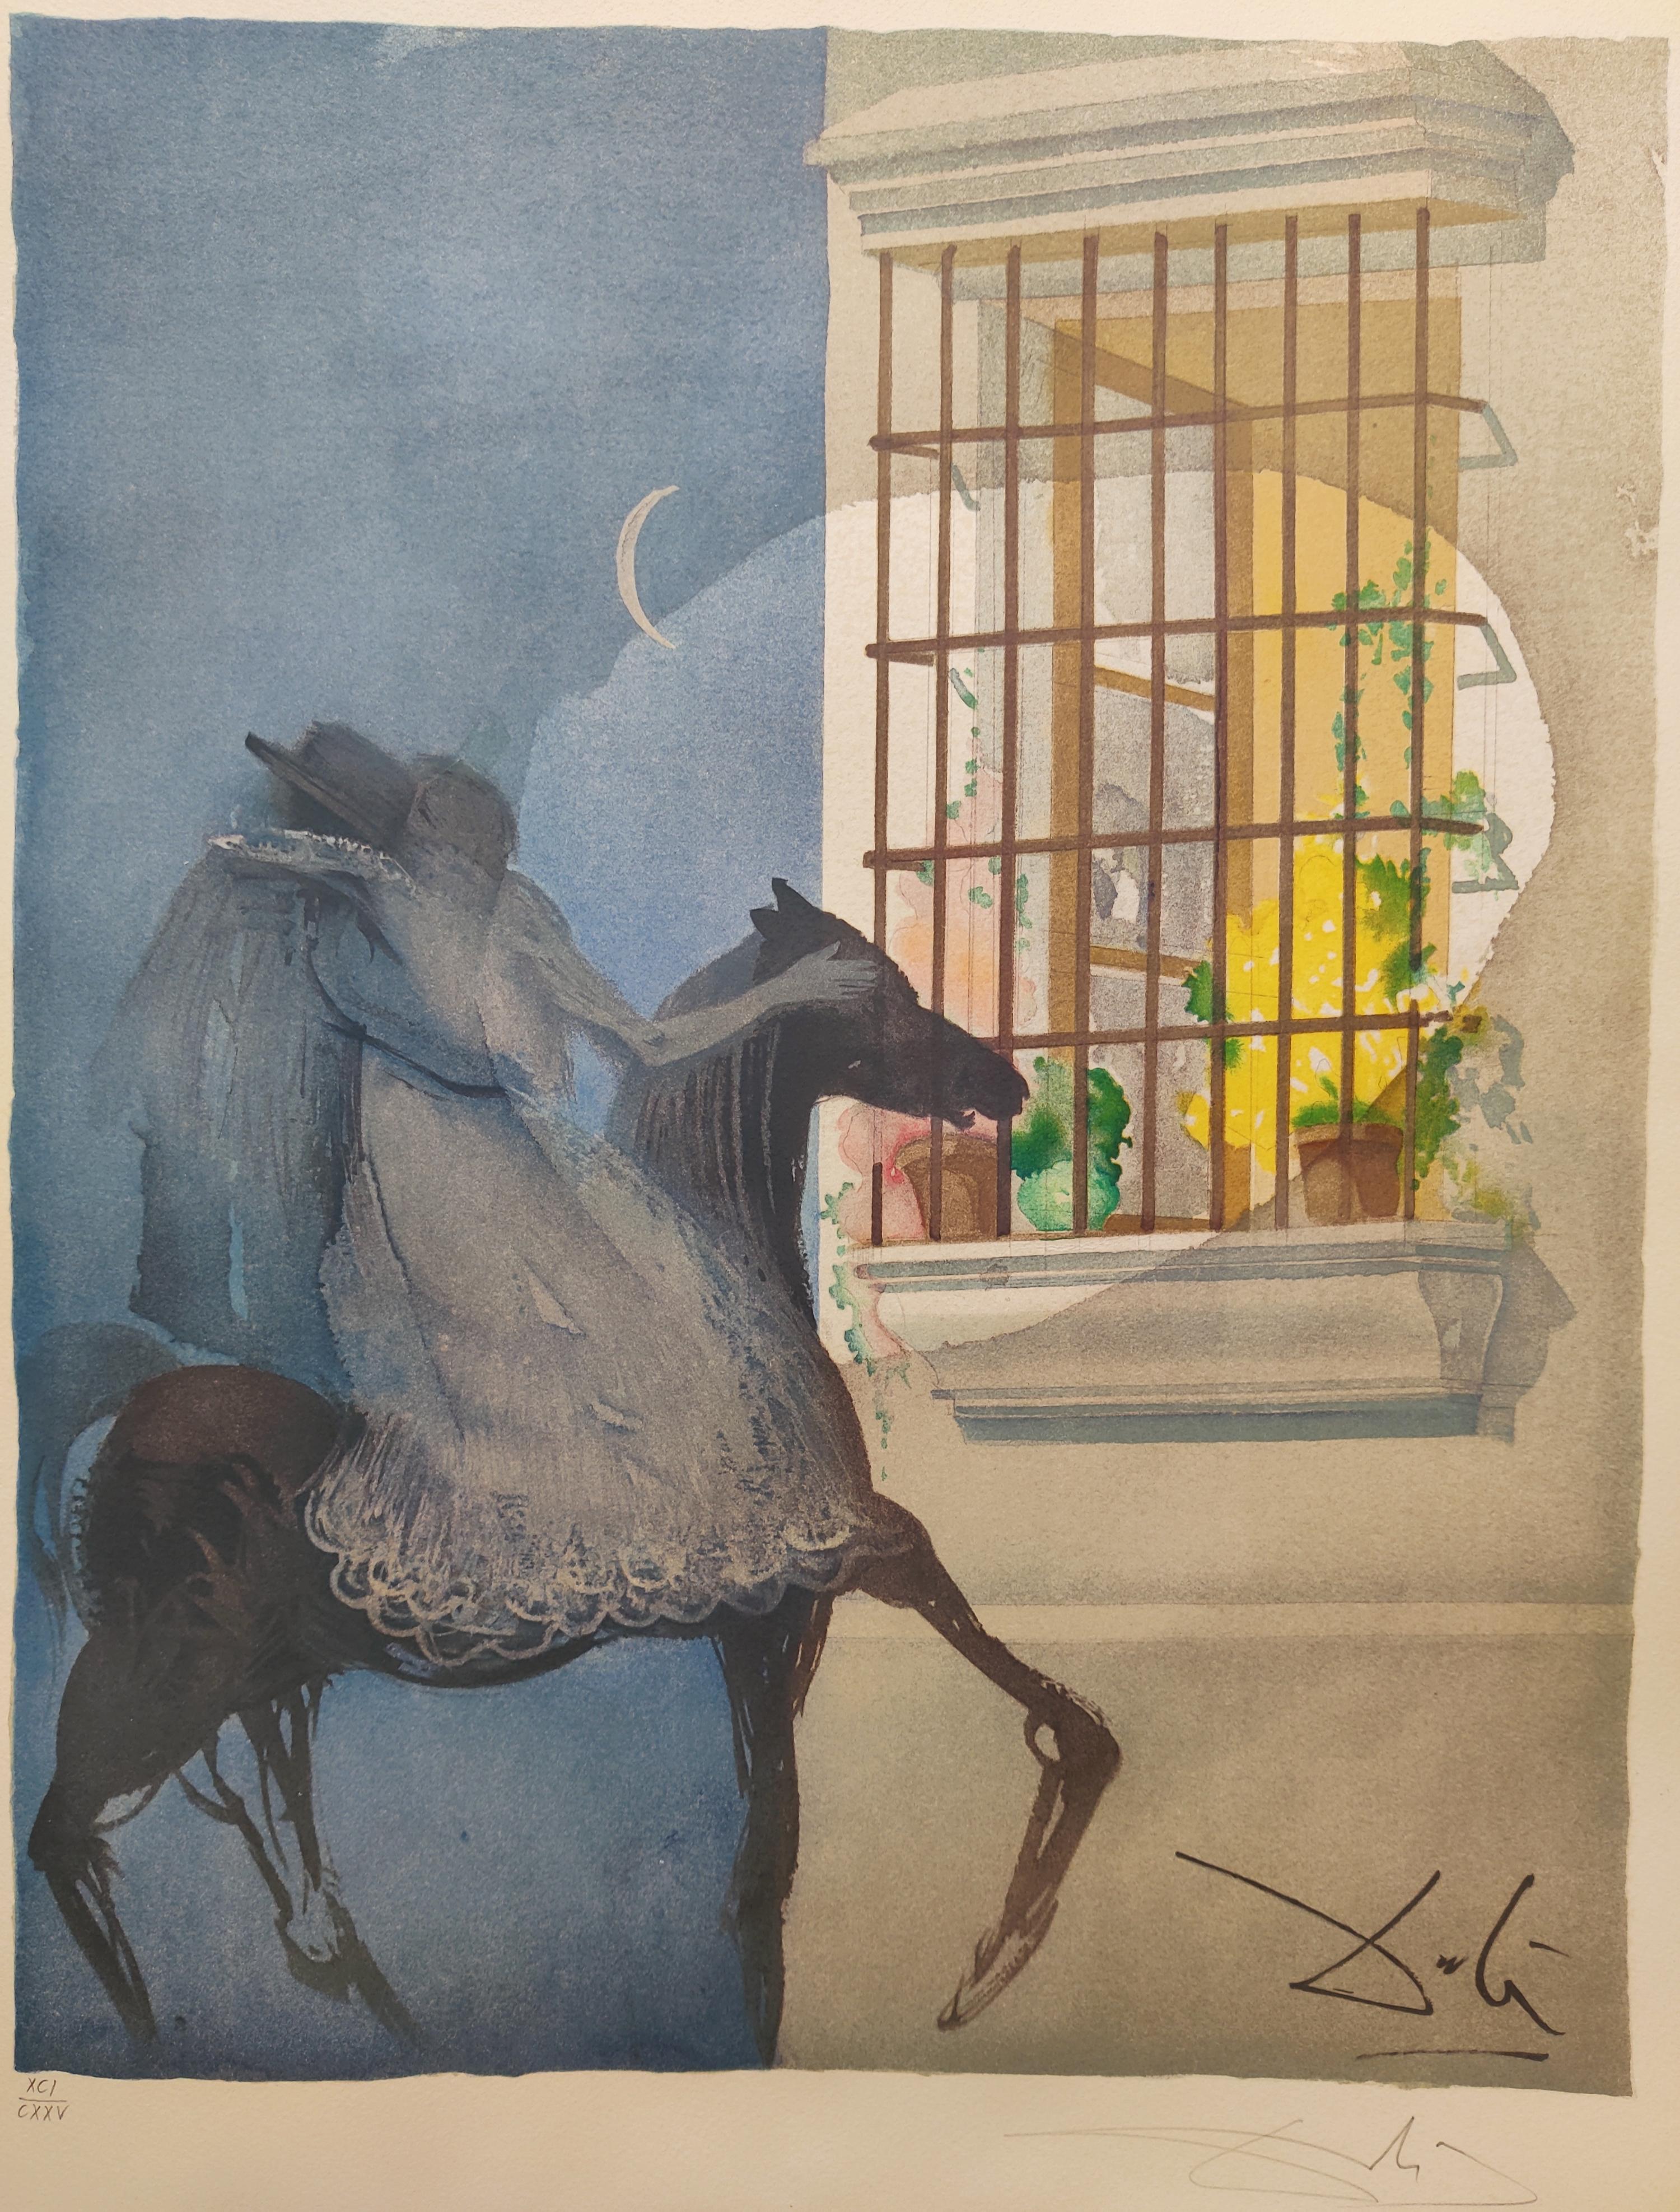 Salvador Dali 
Title: Carmen and Don José fleeing on horseback from the Opera Carmen, 1970
Color lithograph
Edition XCI / CXXV
Hand Signed lower right
Published by Shorewood Publishers, New York
Reference: Field 70-1 K
